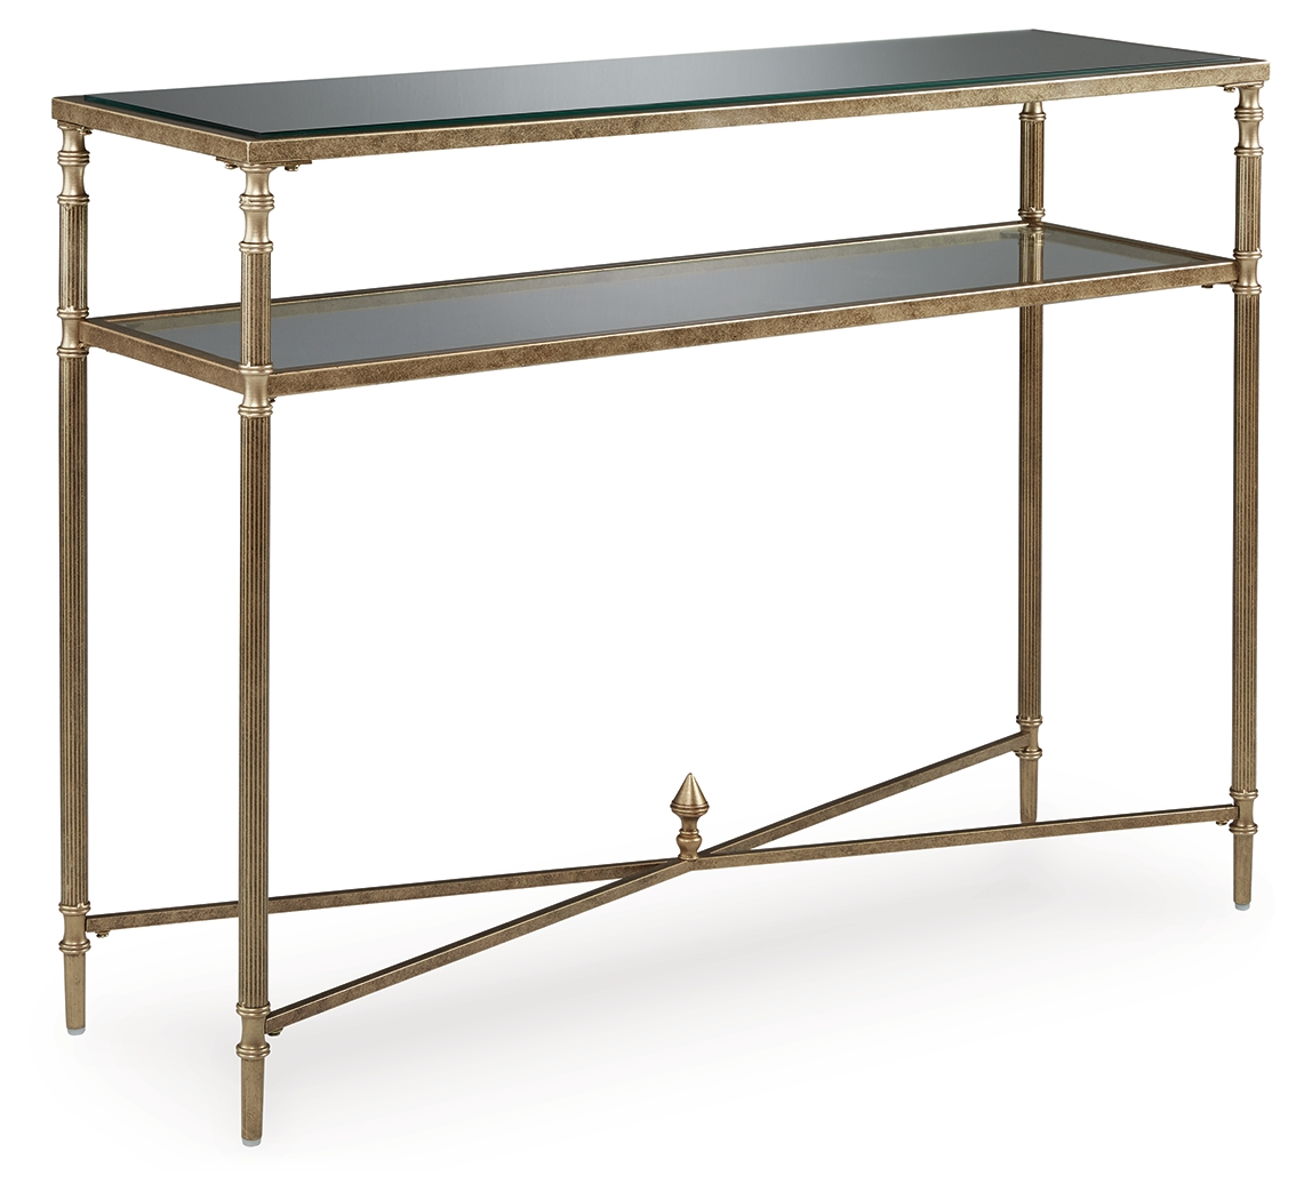 Cloverty Aged Gold Finish Sofa Table